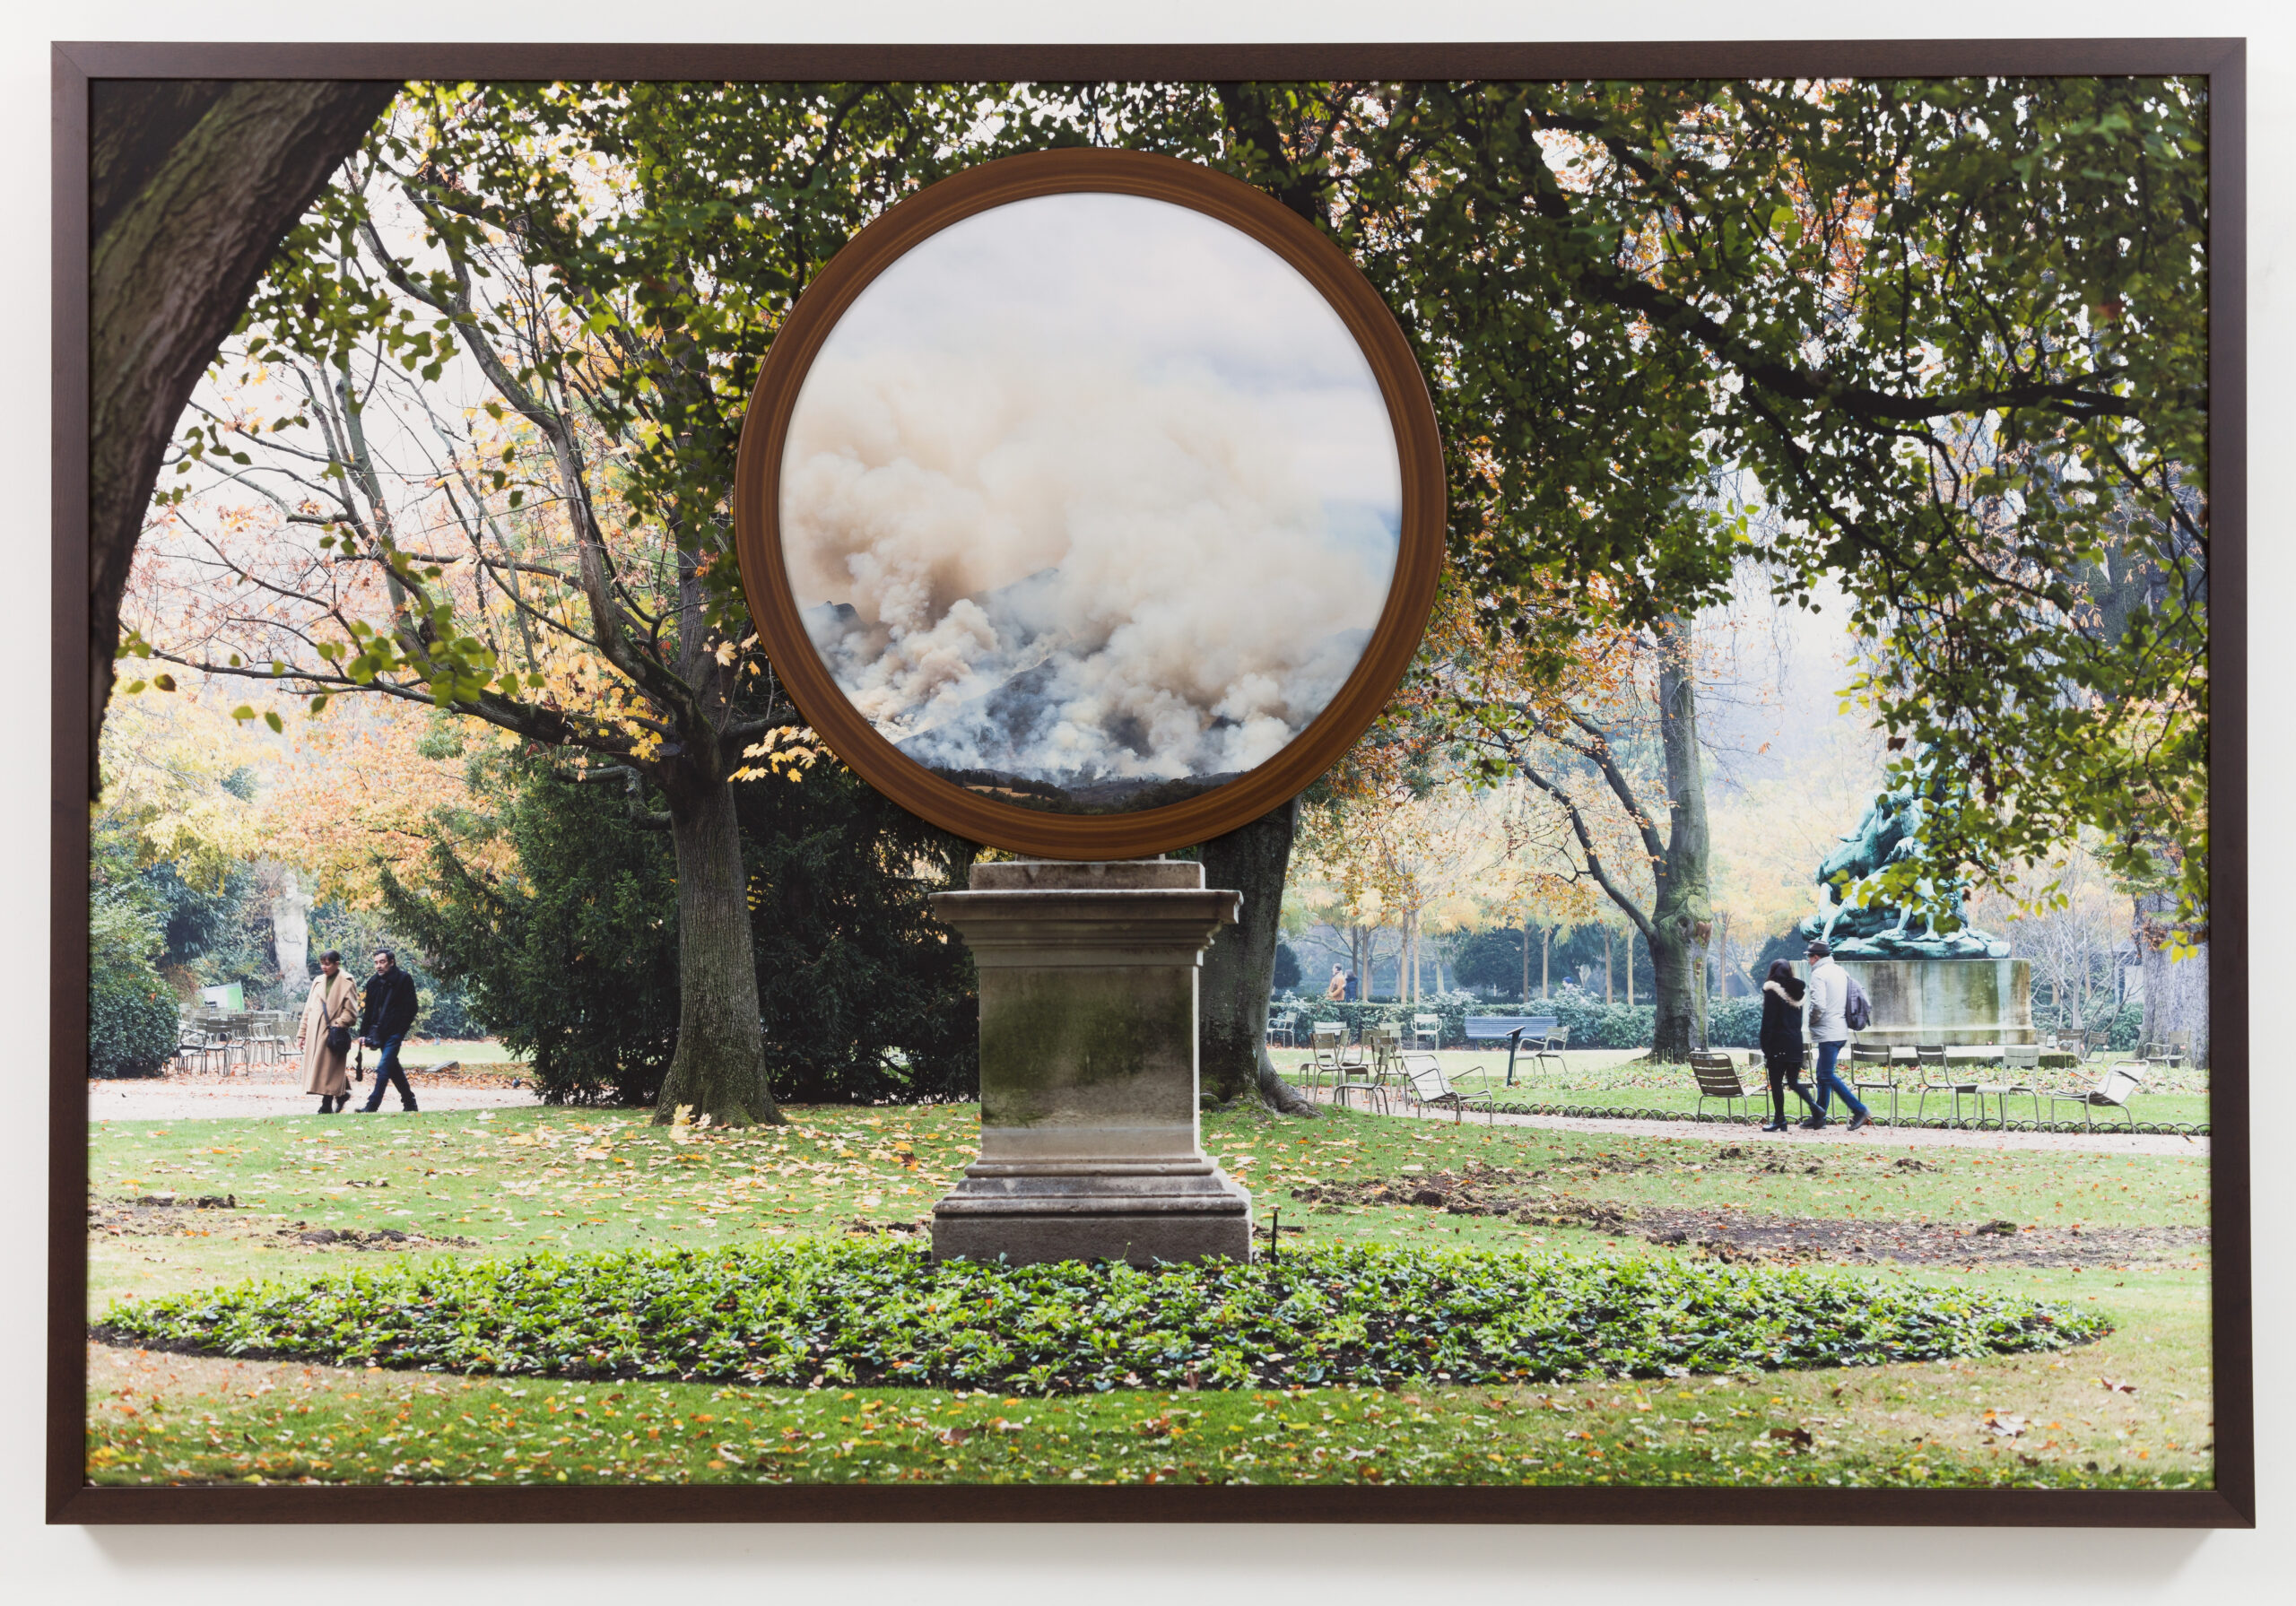 Todd Gray, Paris/Cape Town, 2019, two archival pigment prints in artist’s frames. Courtesy of the Artist and David Lewis, New York.